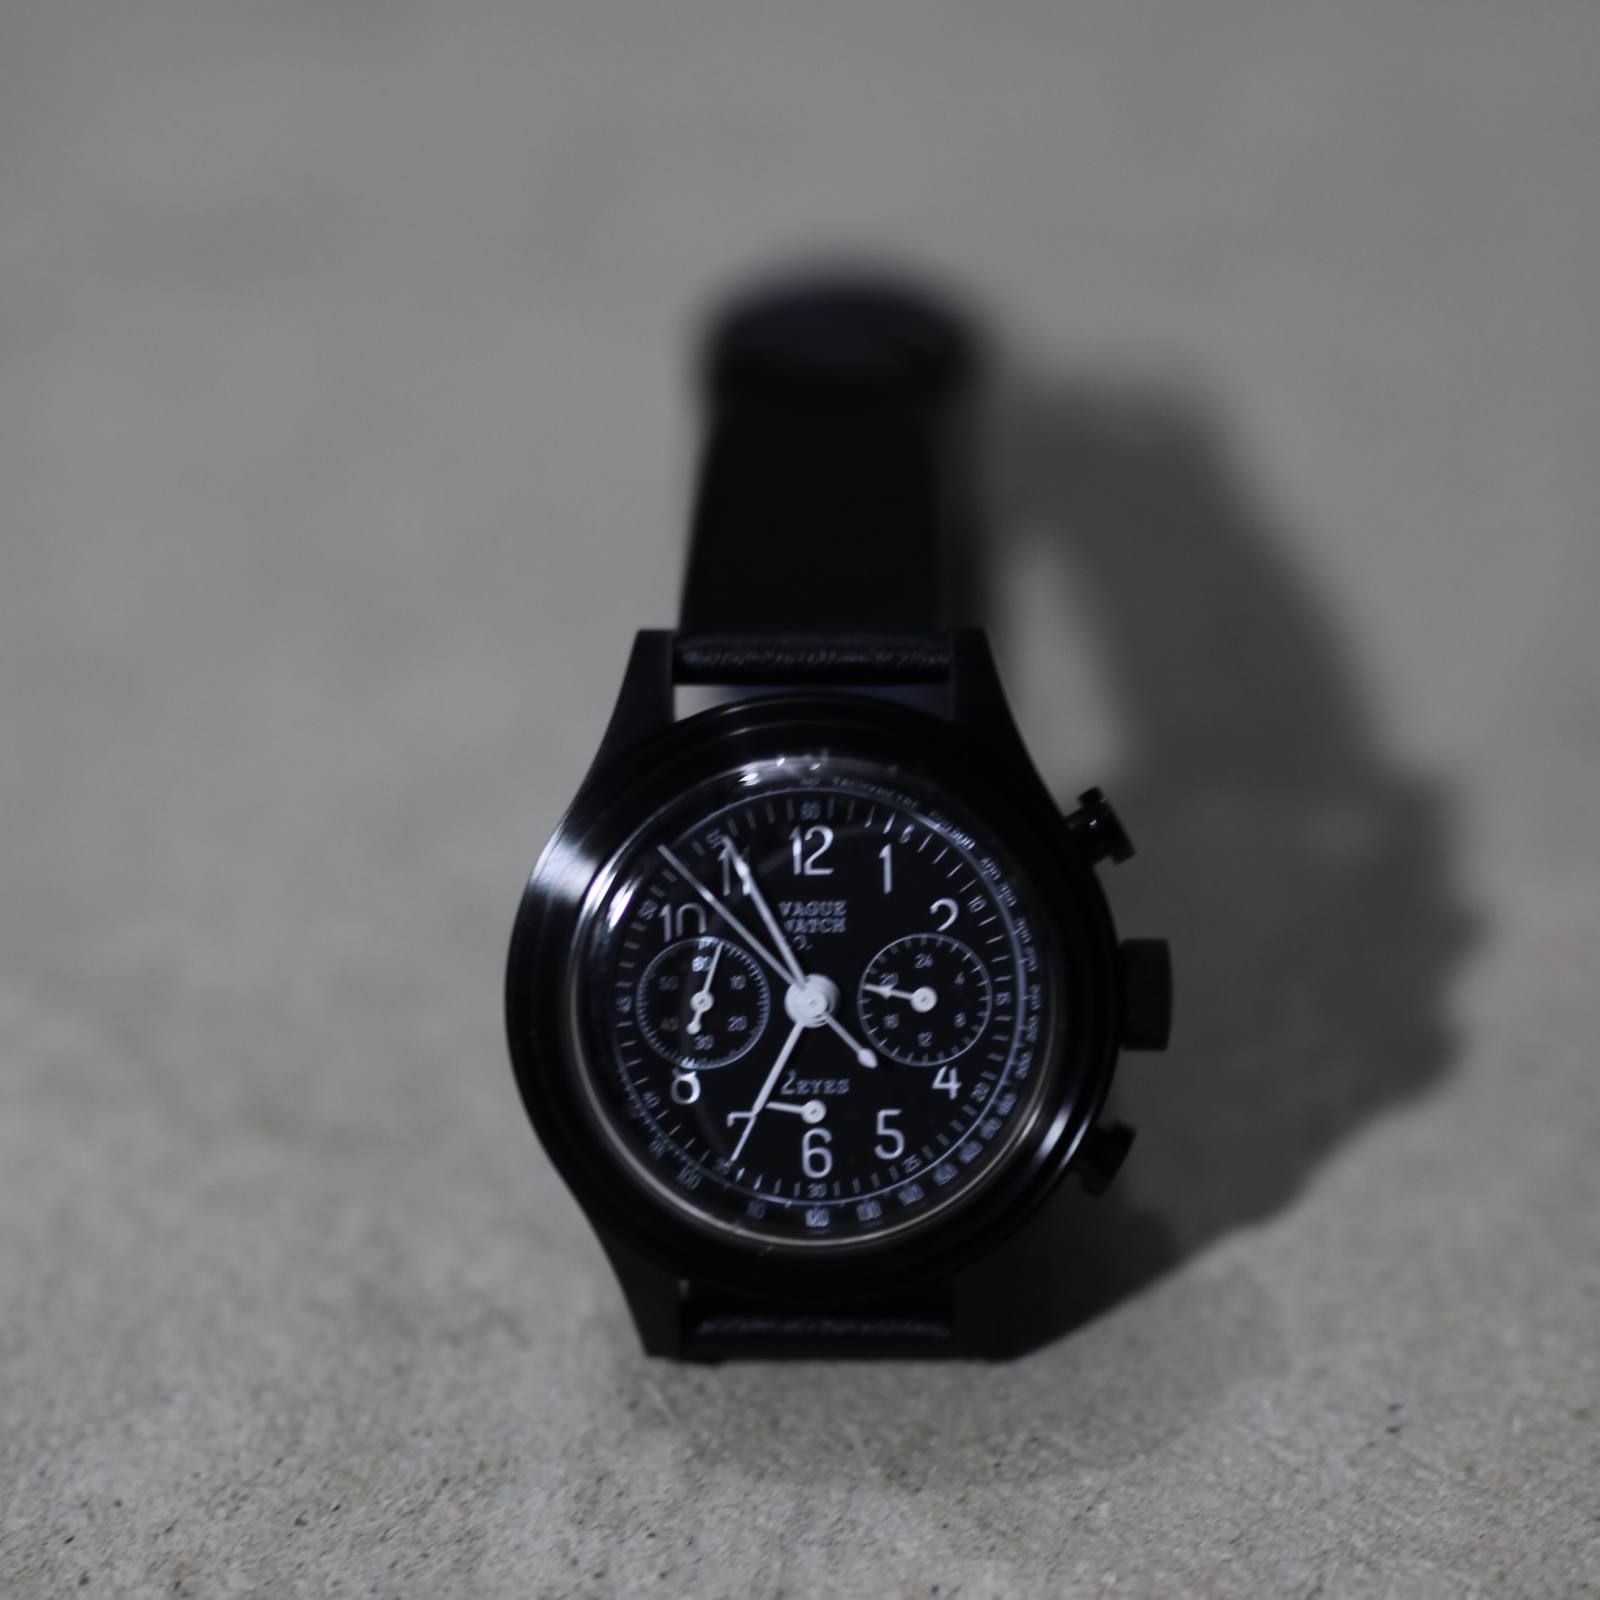 VAGUE WATCH CO. - 【お取り寄せ注文可能】2EYES | ACRMTSM ONLINE STORE